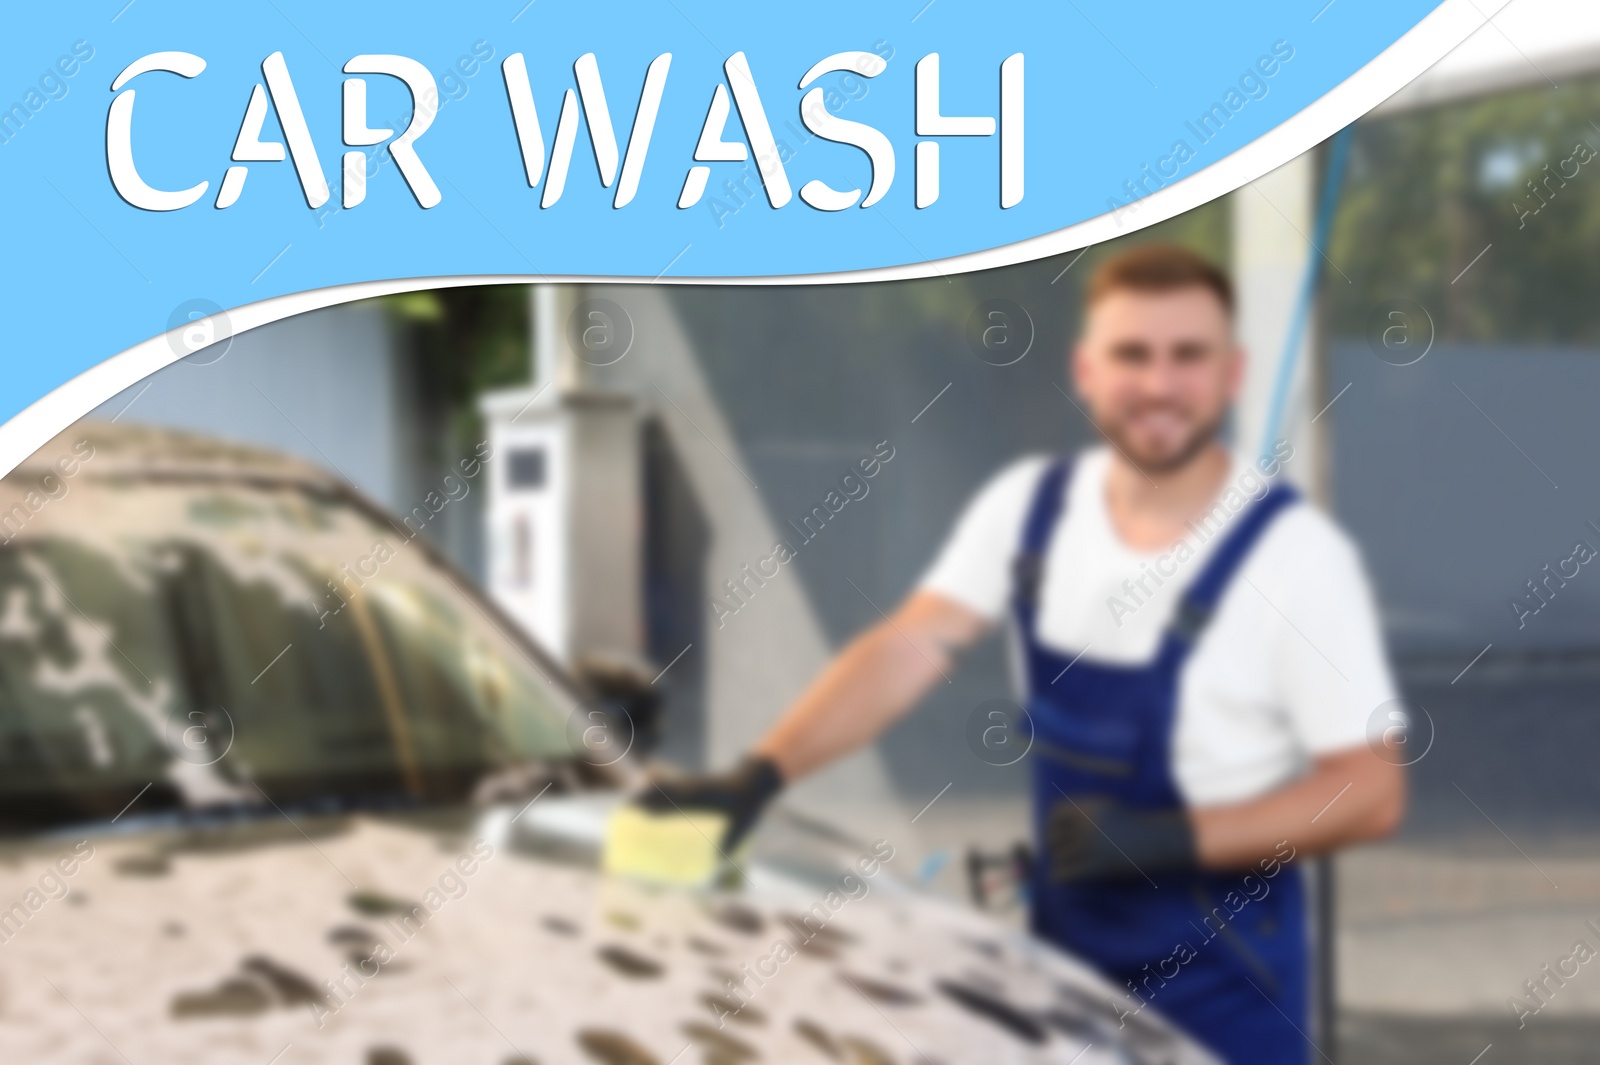 Image of Text Car Wash and worker cleaning automobile with sponge on background